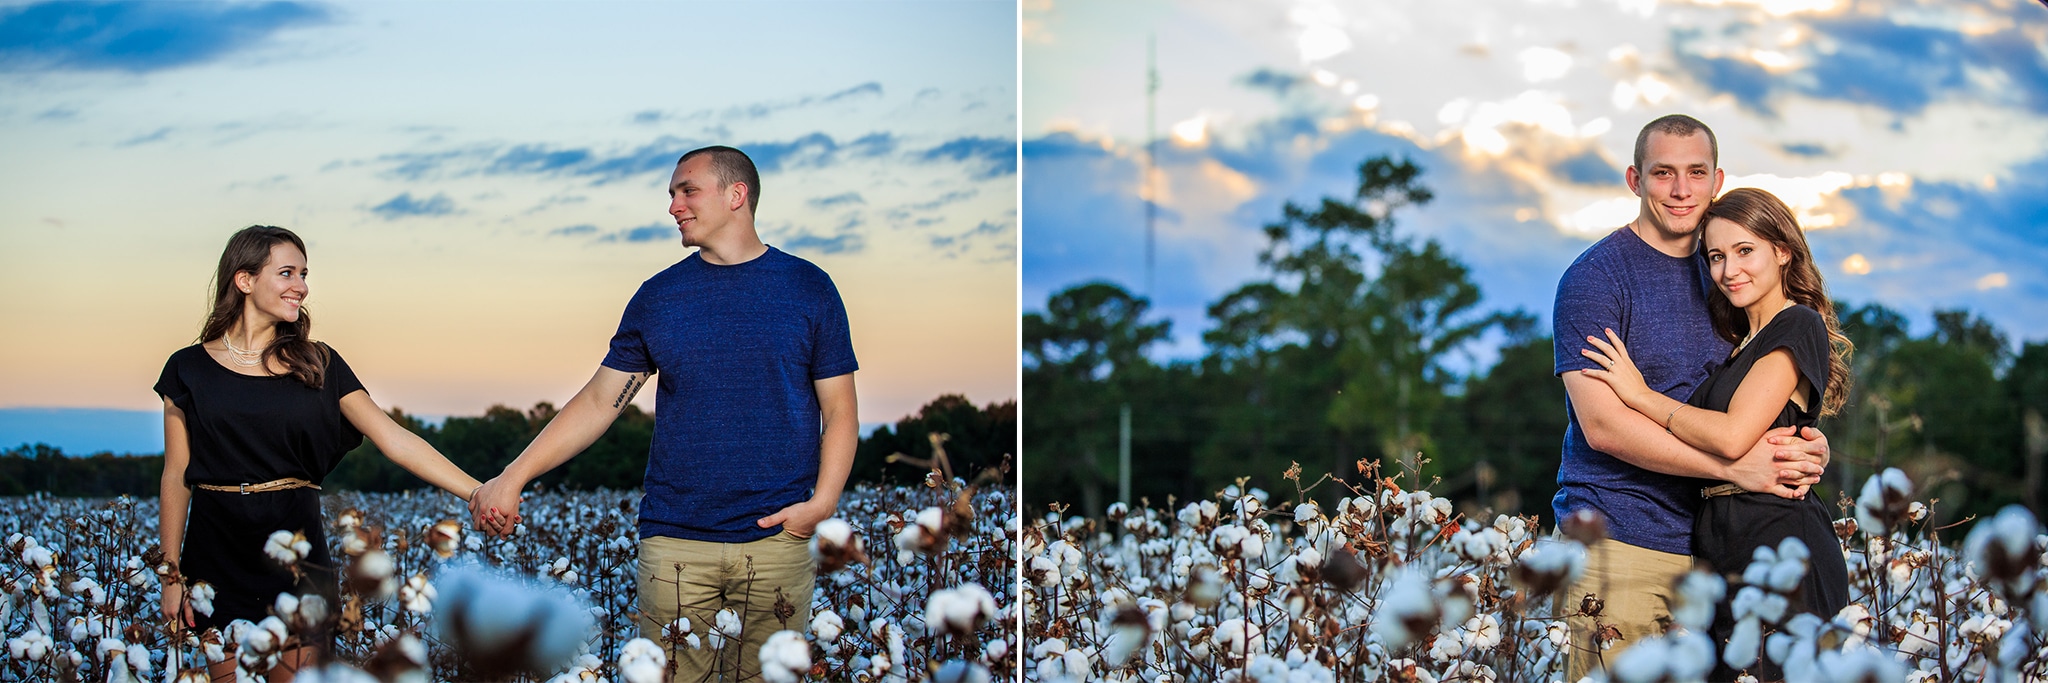 Sunset time at the Cotton Fields